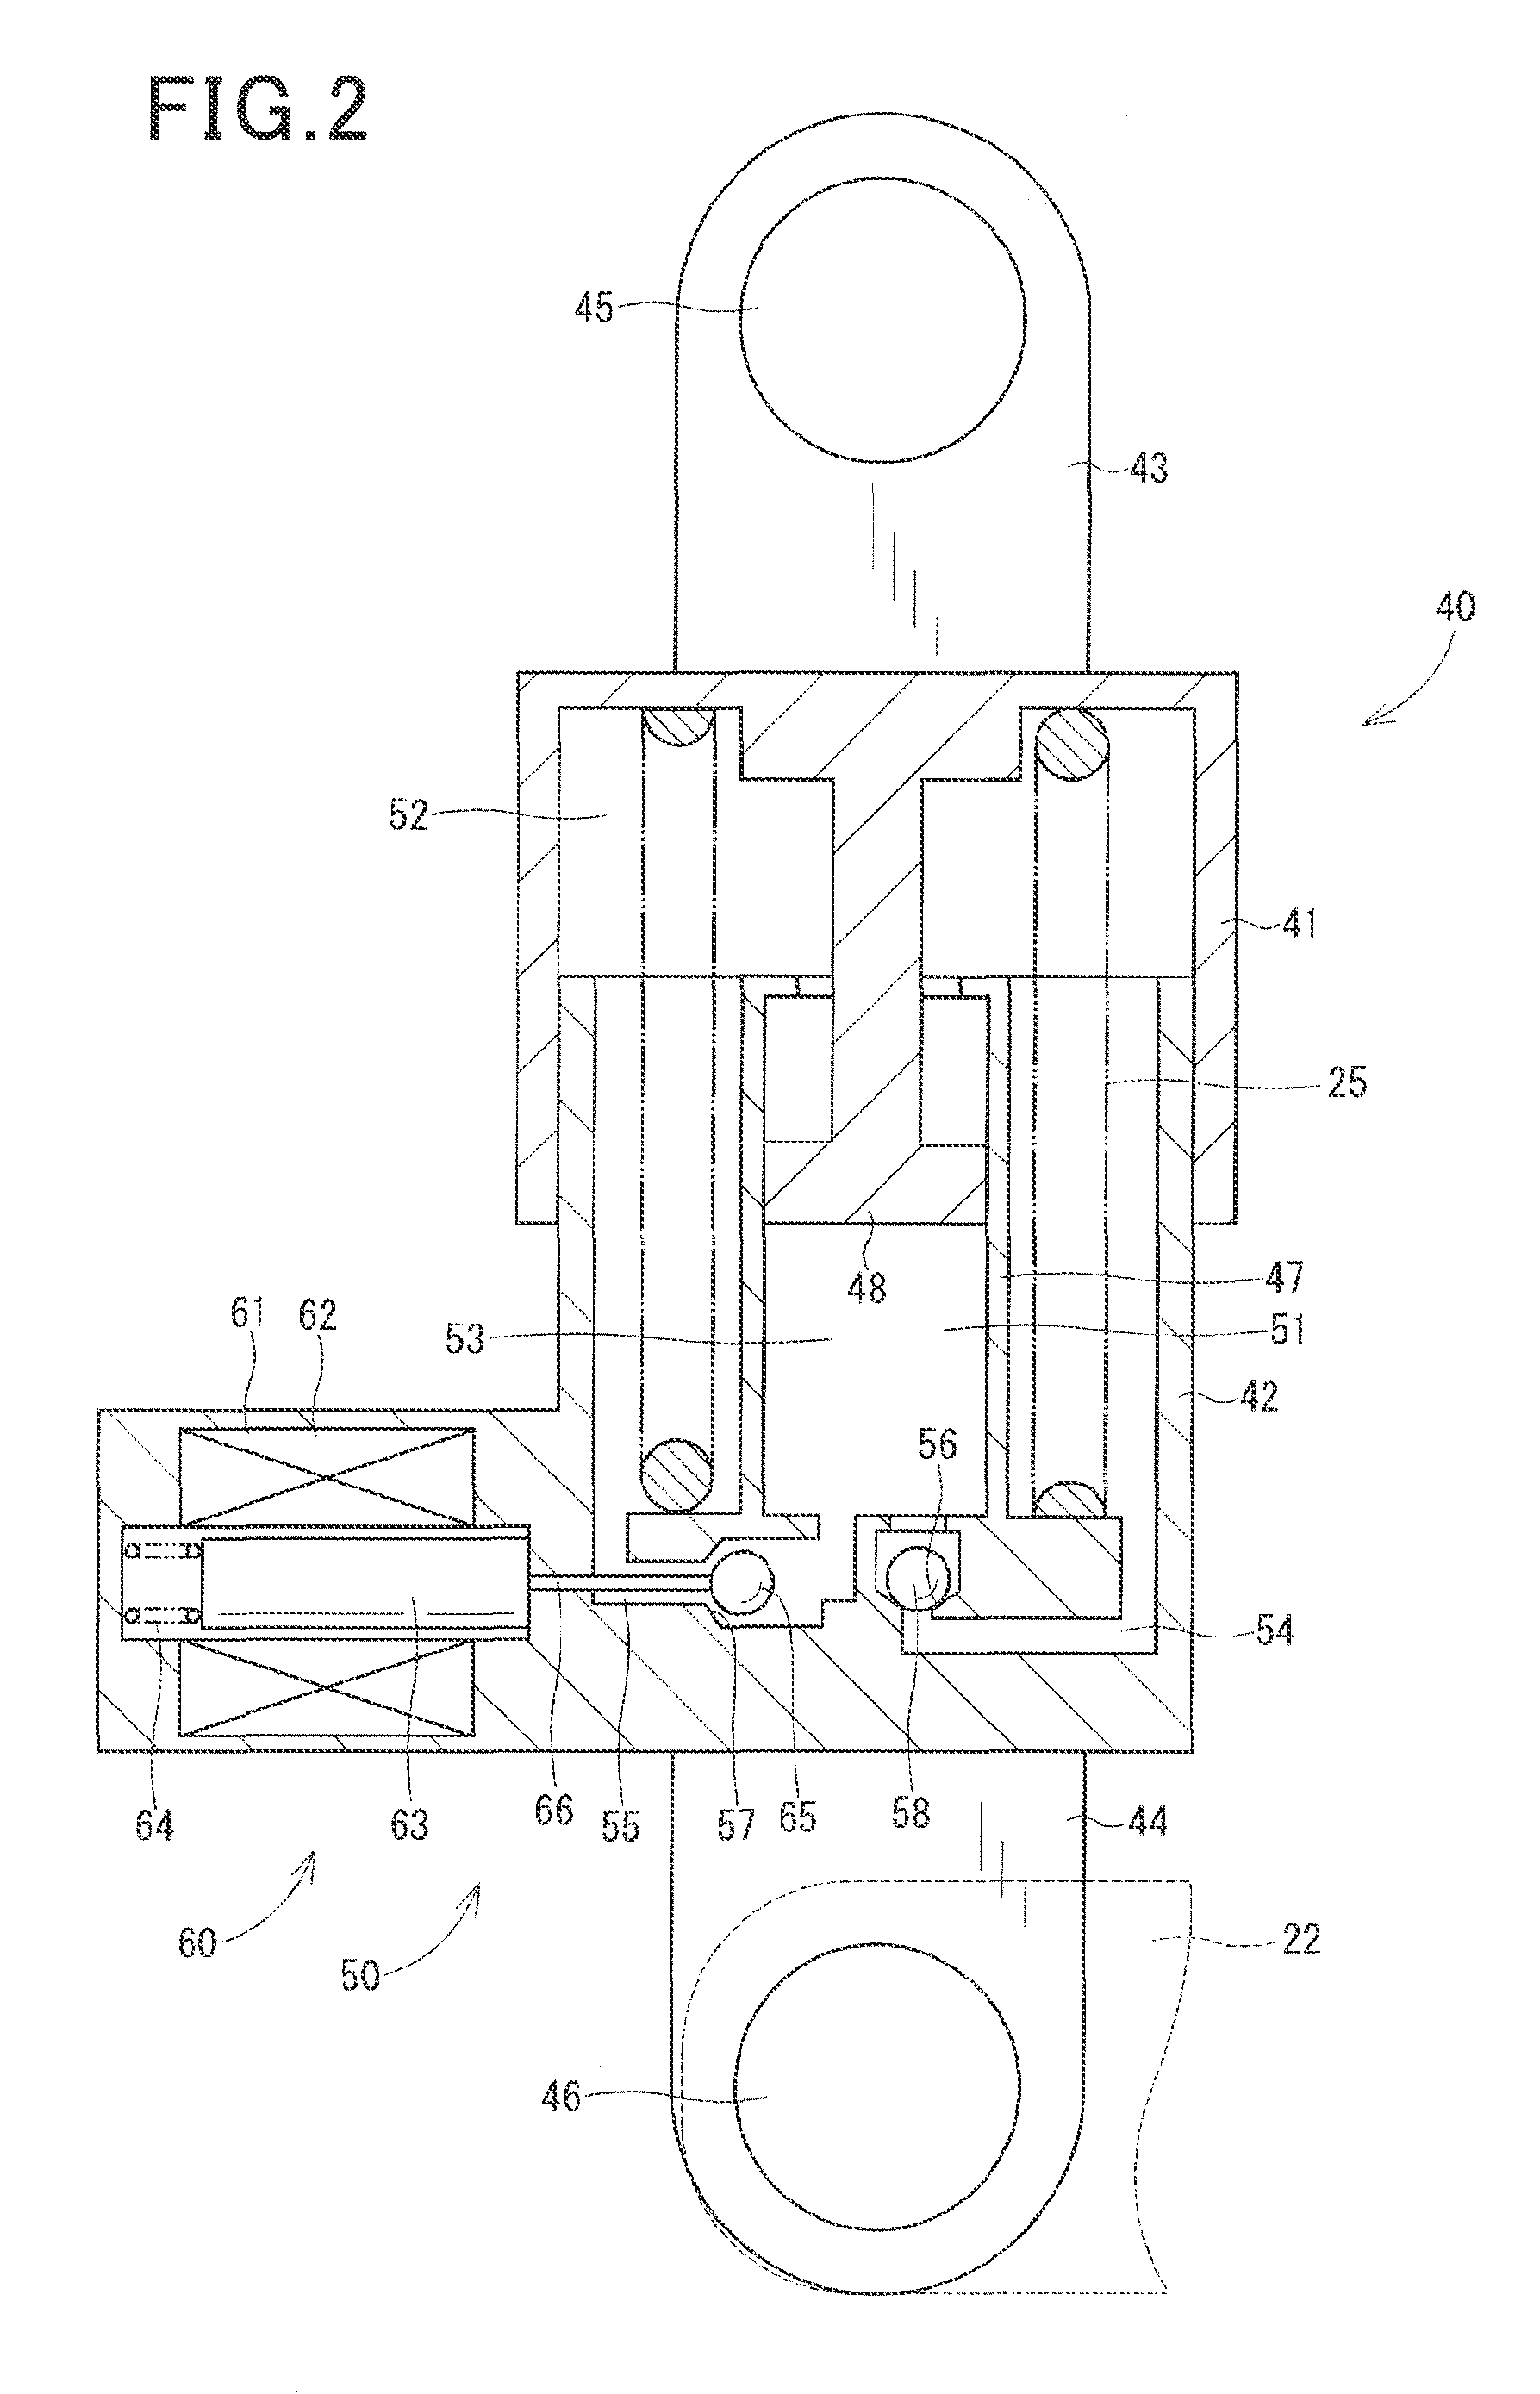 Structure of power transmission apparatus